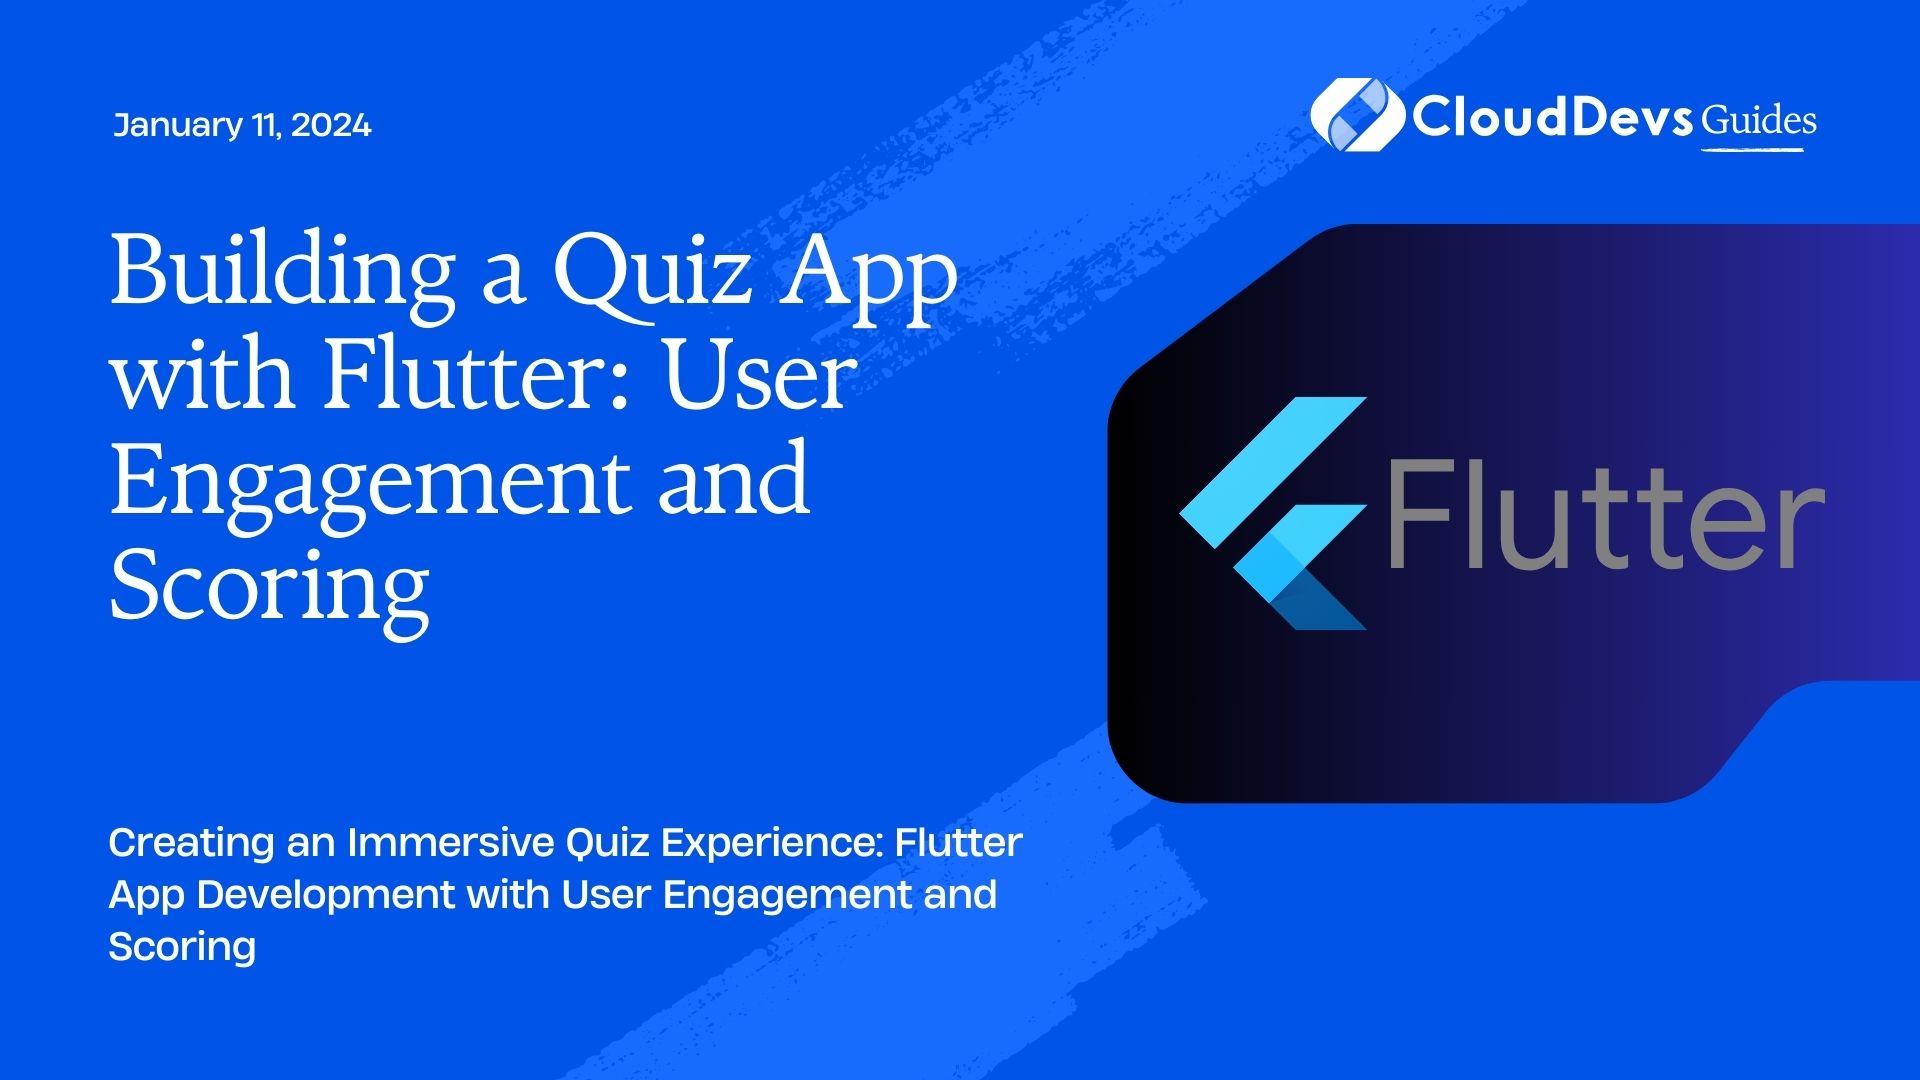 Building a Quiz App with Flutter: User Engagement and Scoring